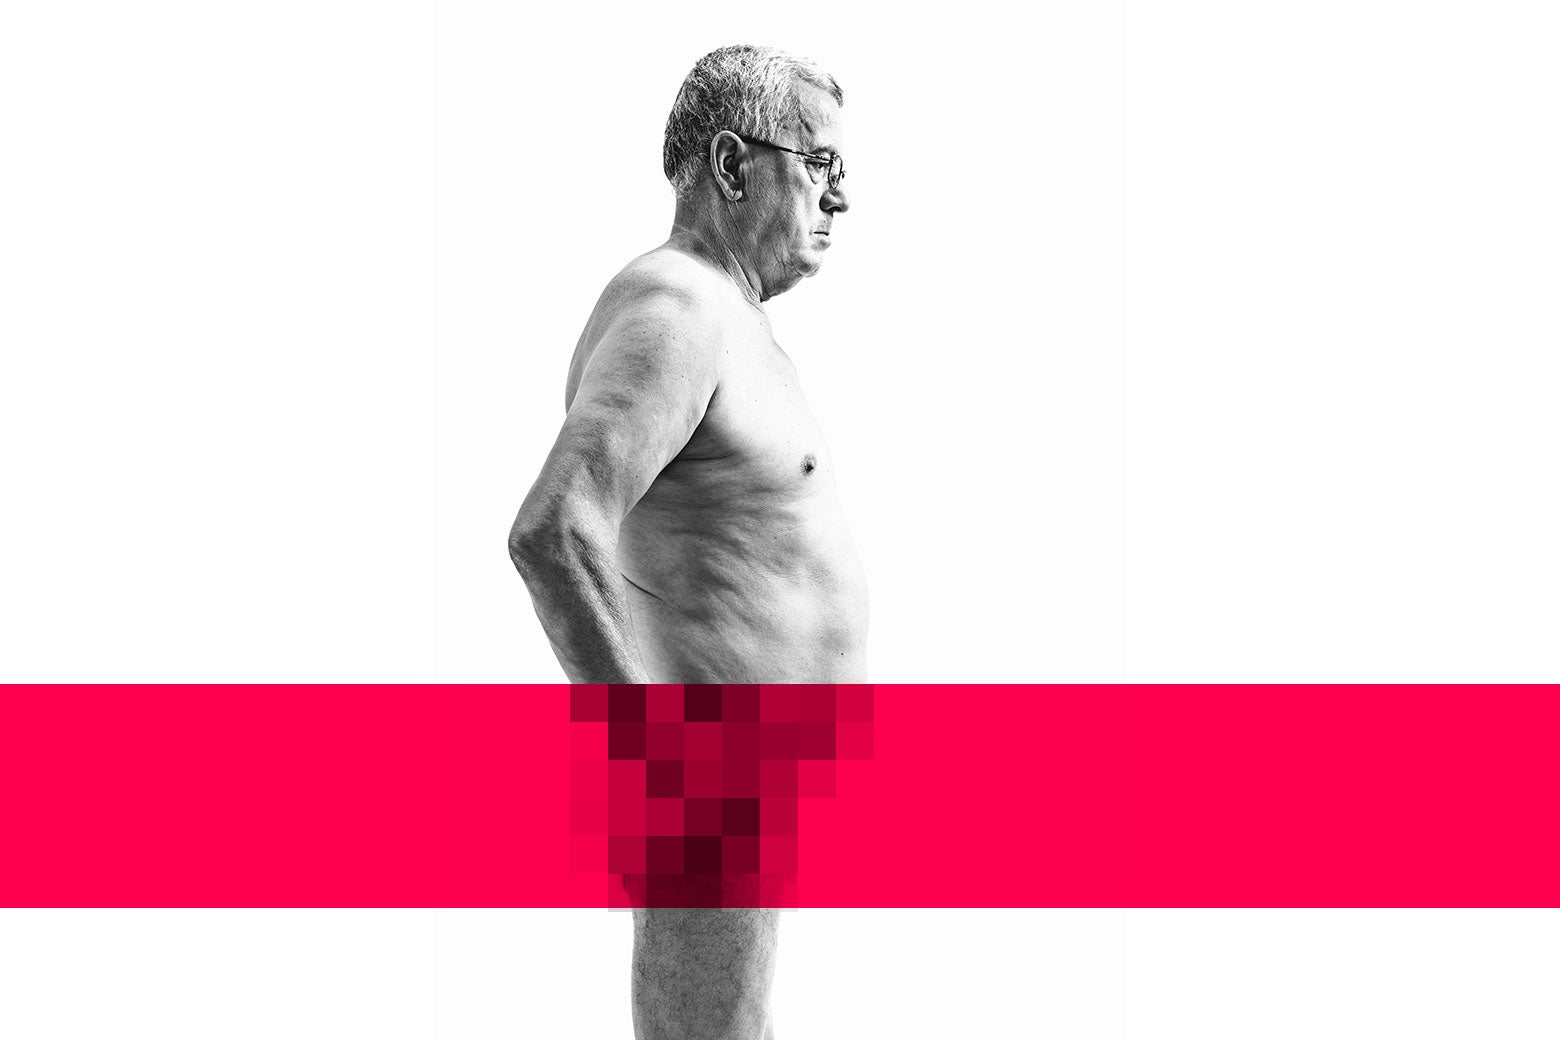 An older man, naked, with a red bar and pixelation across his nether regions.